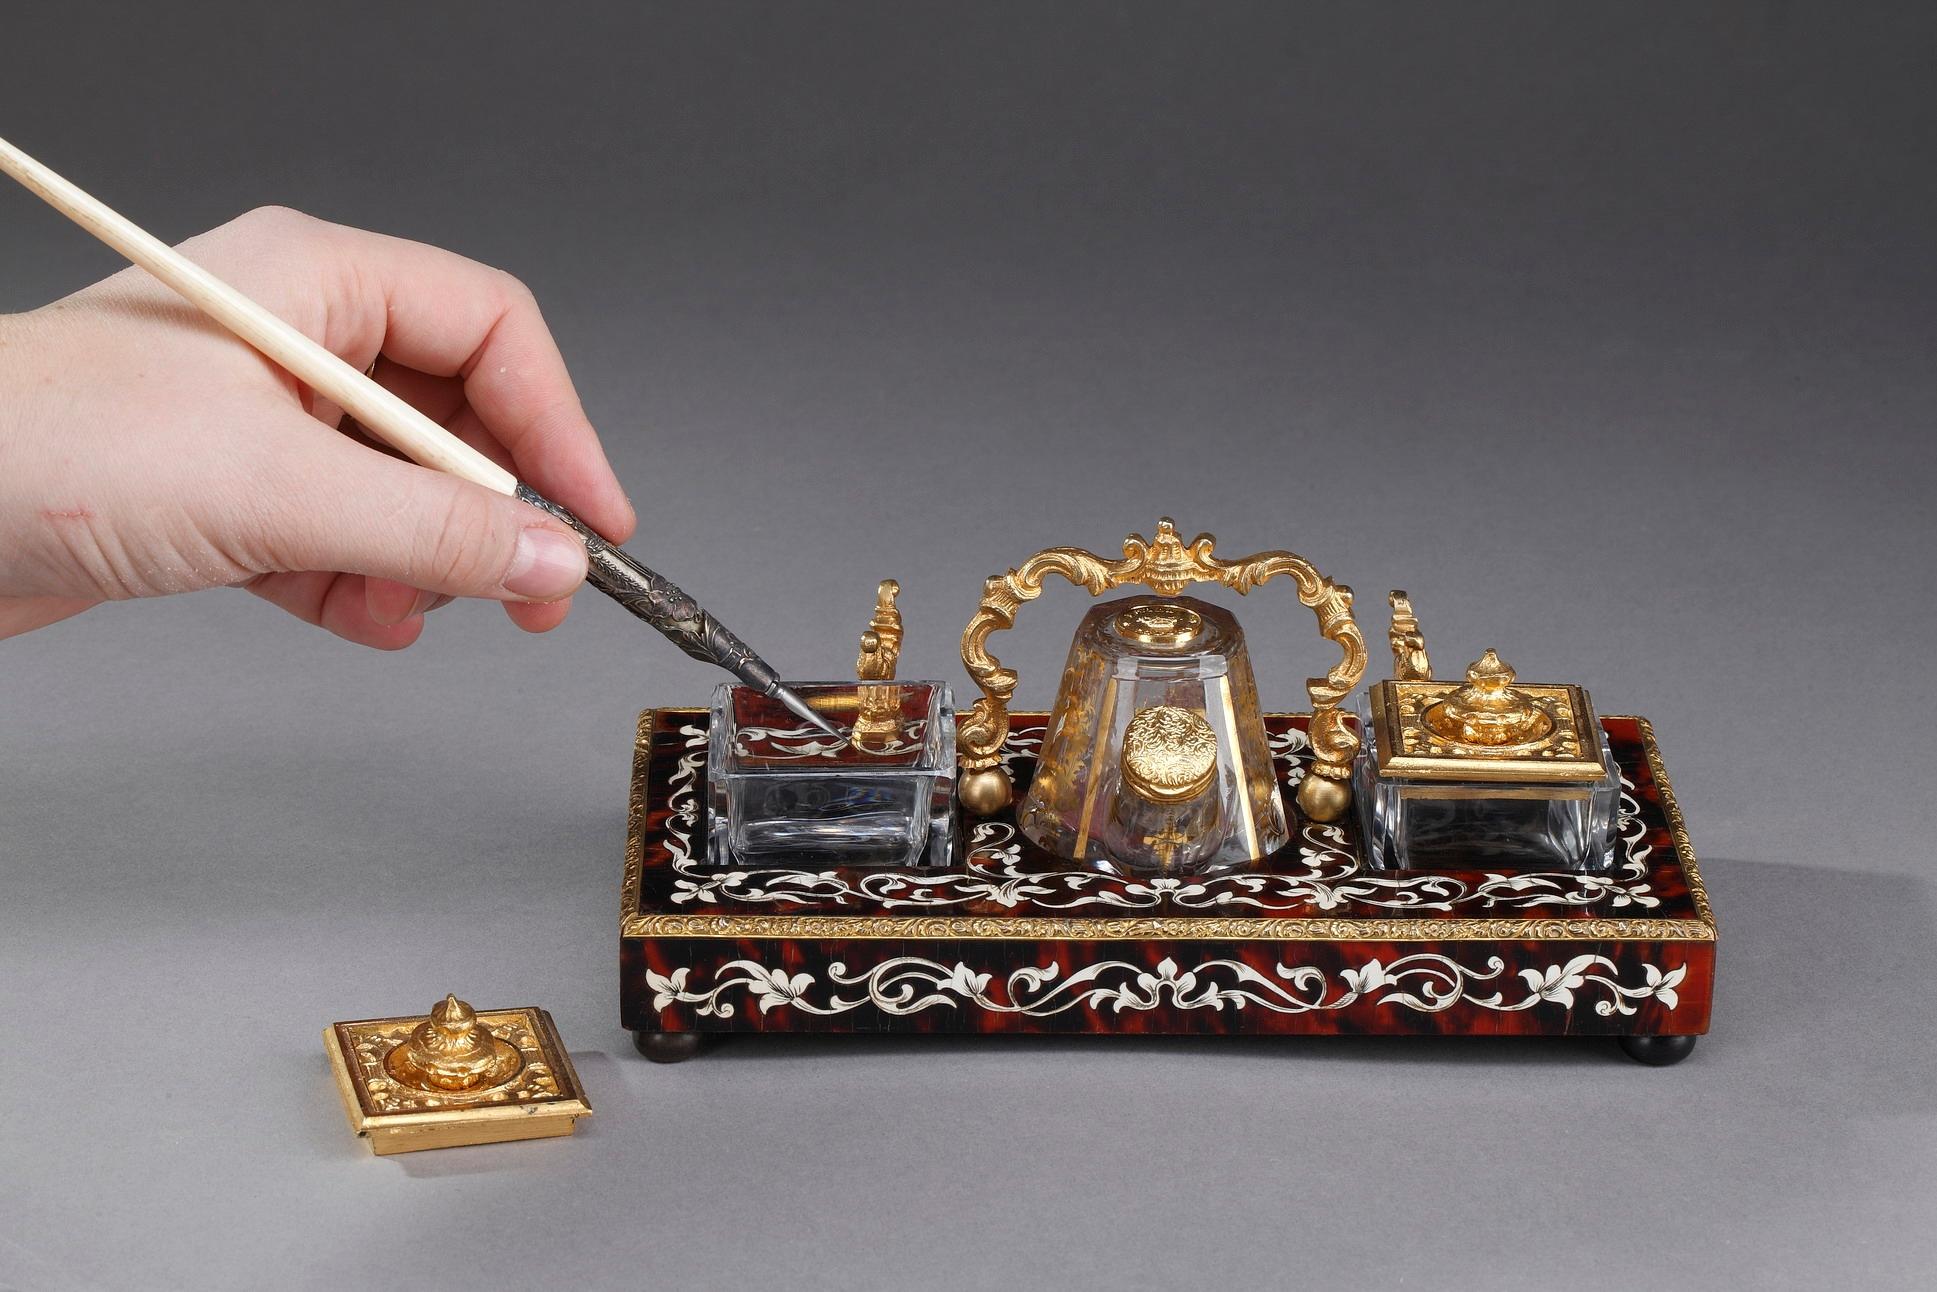 Small English ink stand crafted of tortoise, crystal and gilt bronze by Patent in London. It is richly decorated with inlaid foliage and floral motifs. This stand is well appointed for the writing with its three removable, cut-crystal vessels with